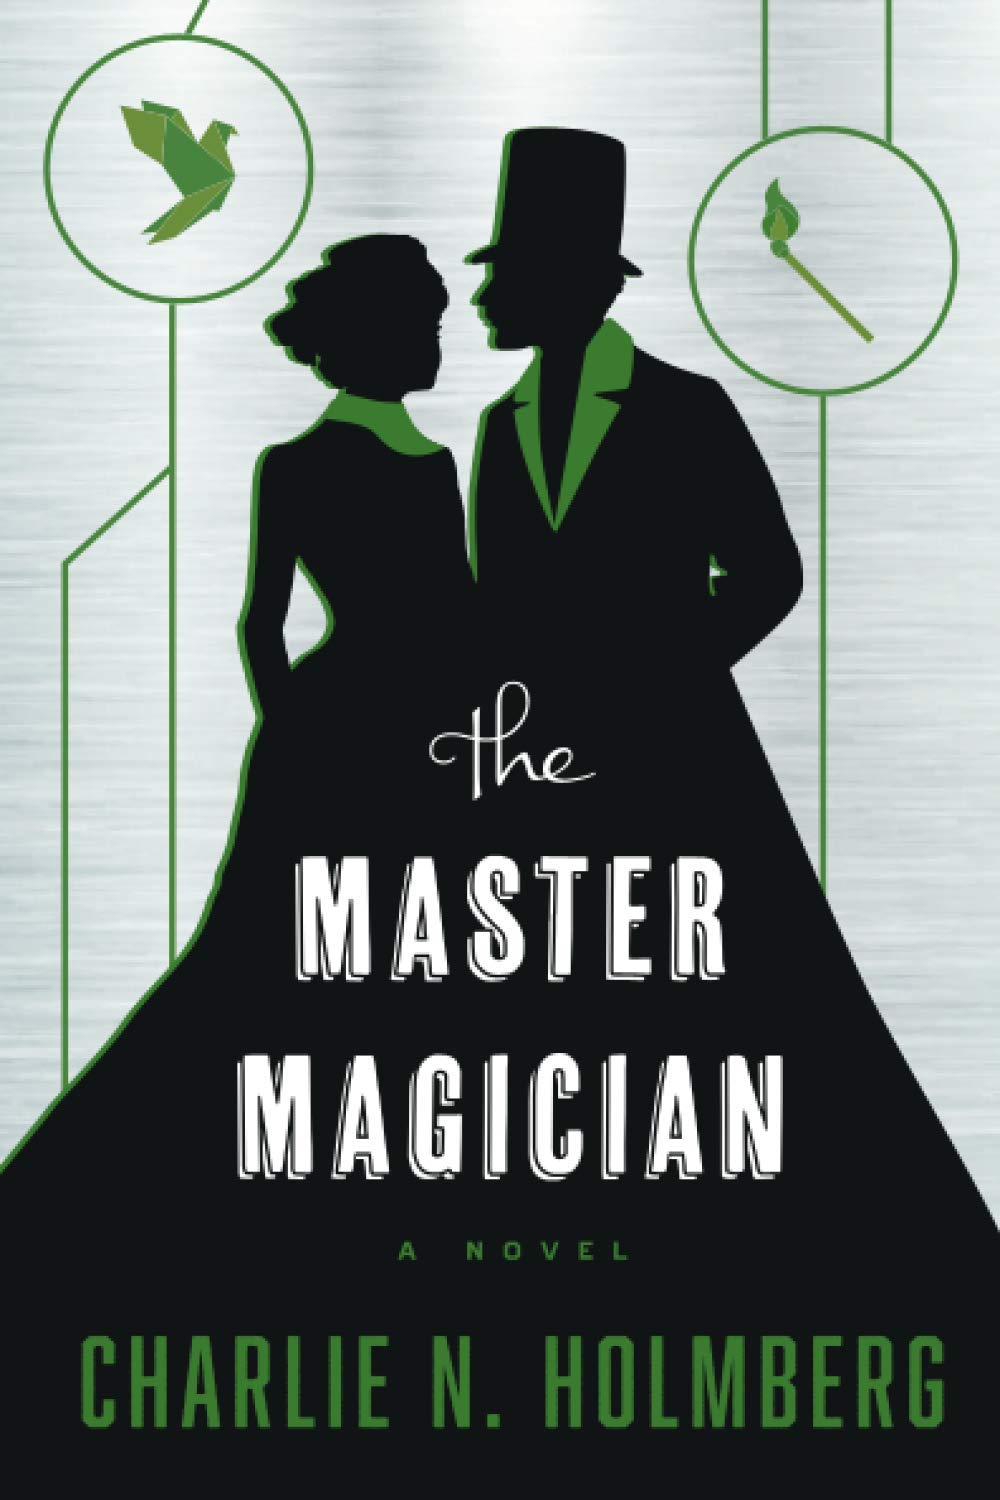 Charlie N. Holmberg: The Master Magician (2015)